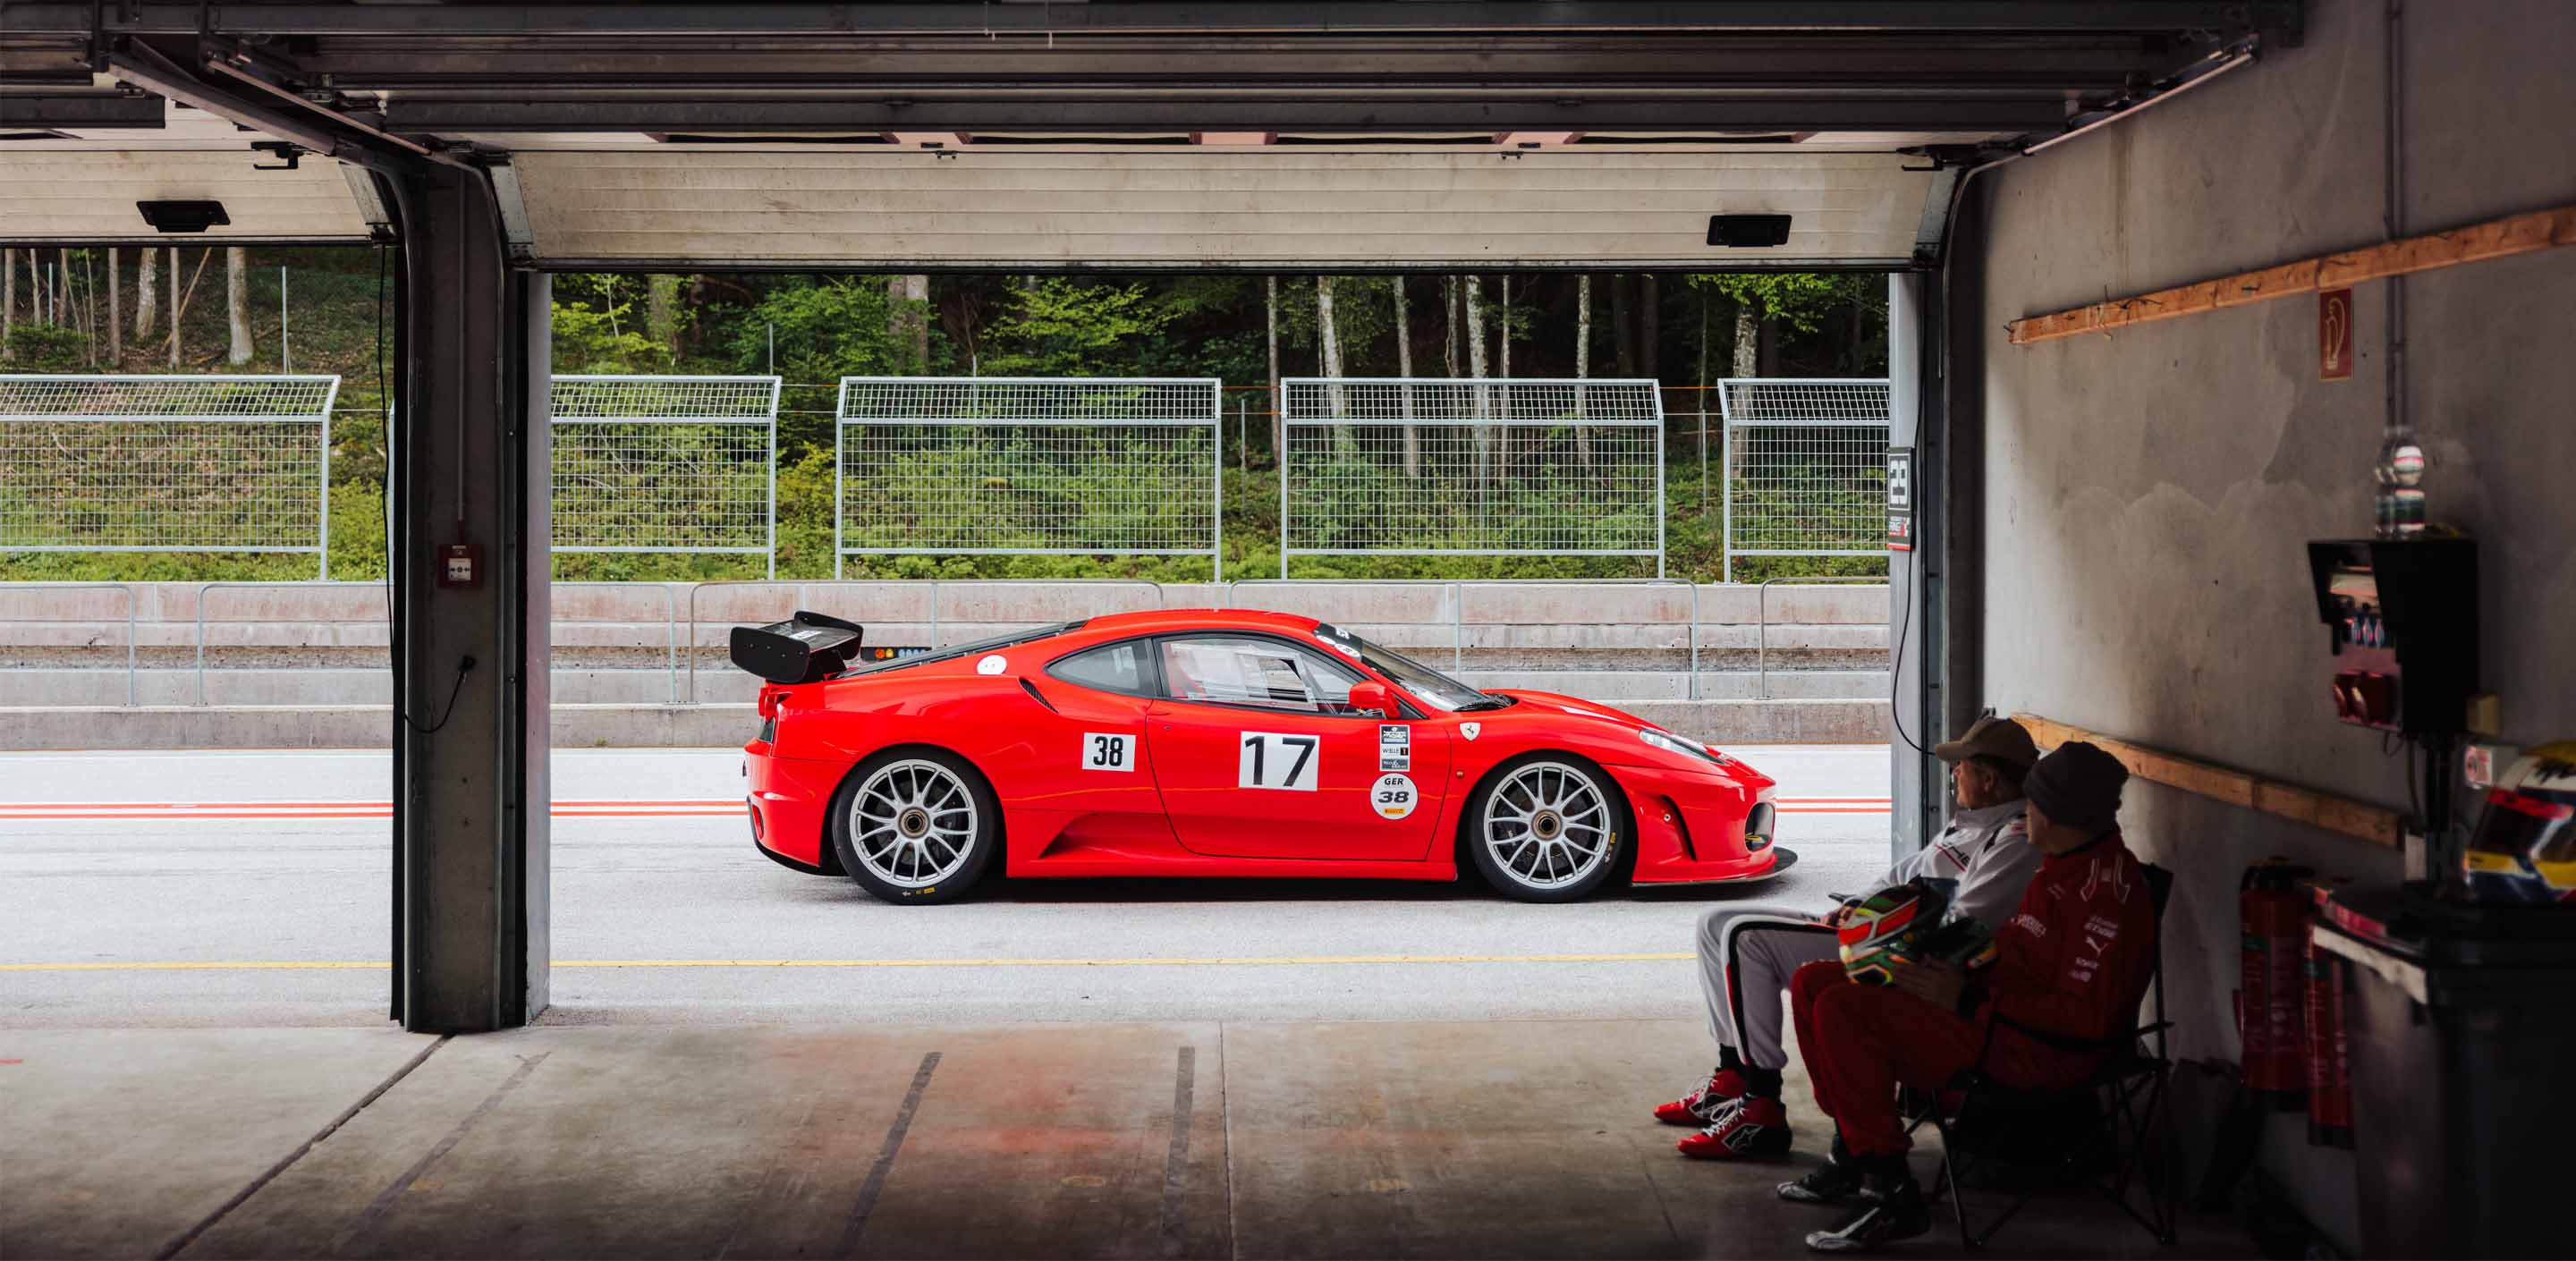 View on a Ferrari 360 Challenge race car through a Pitbox at Salzburgring during a GP Days Open Pitlane Track Day with two driver waiting in the Box sitting on chairs.